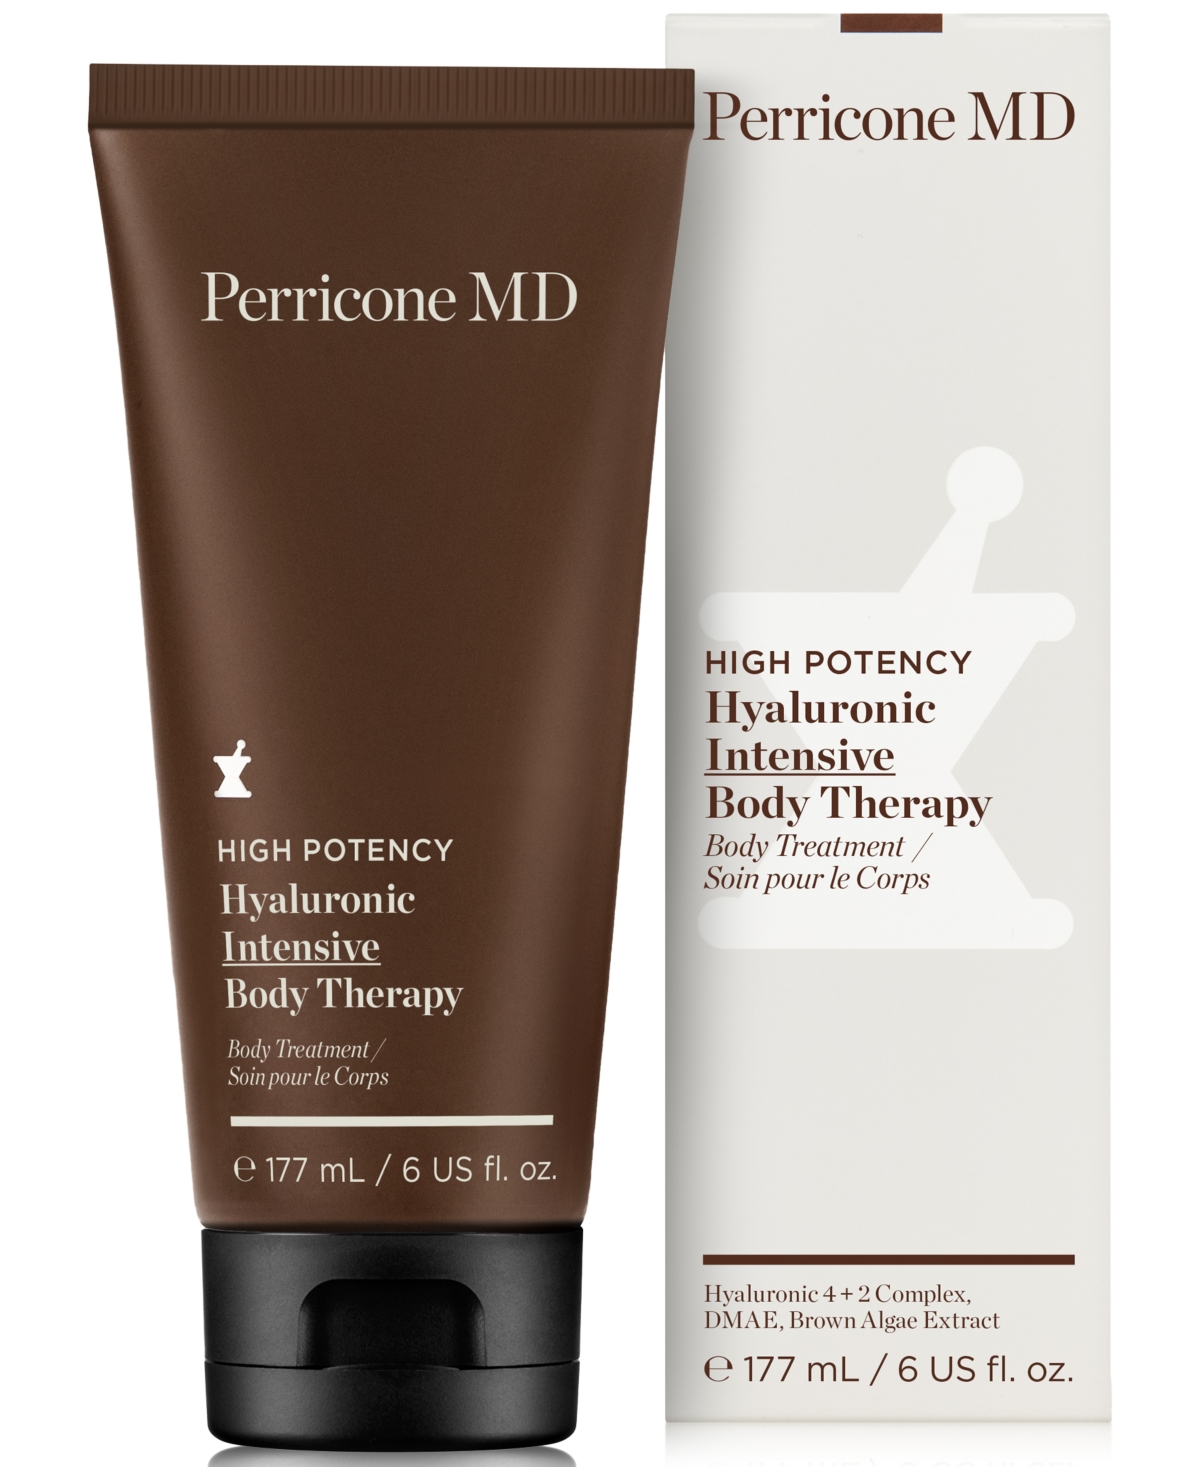 PERRICONE MD HIGH POTENCY HYALURONIC INTENSIVE BODY THERAPY, 6 OZ.